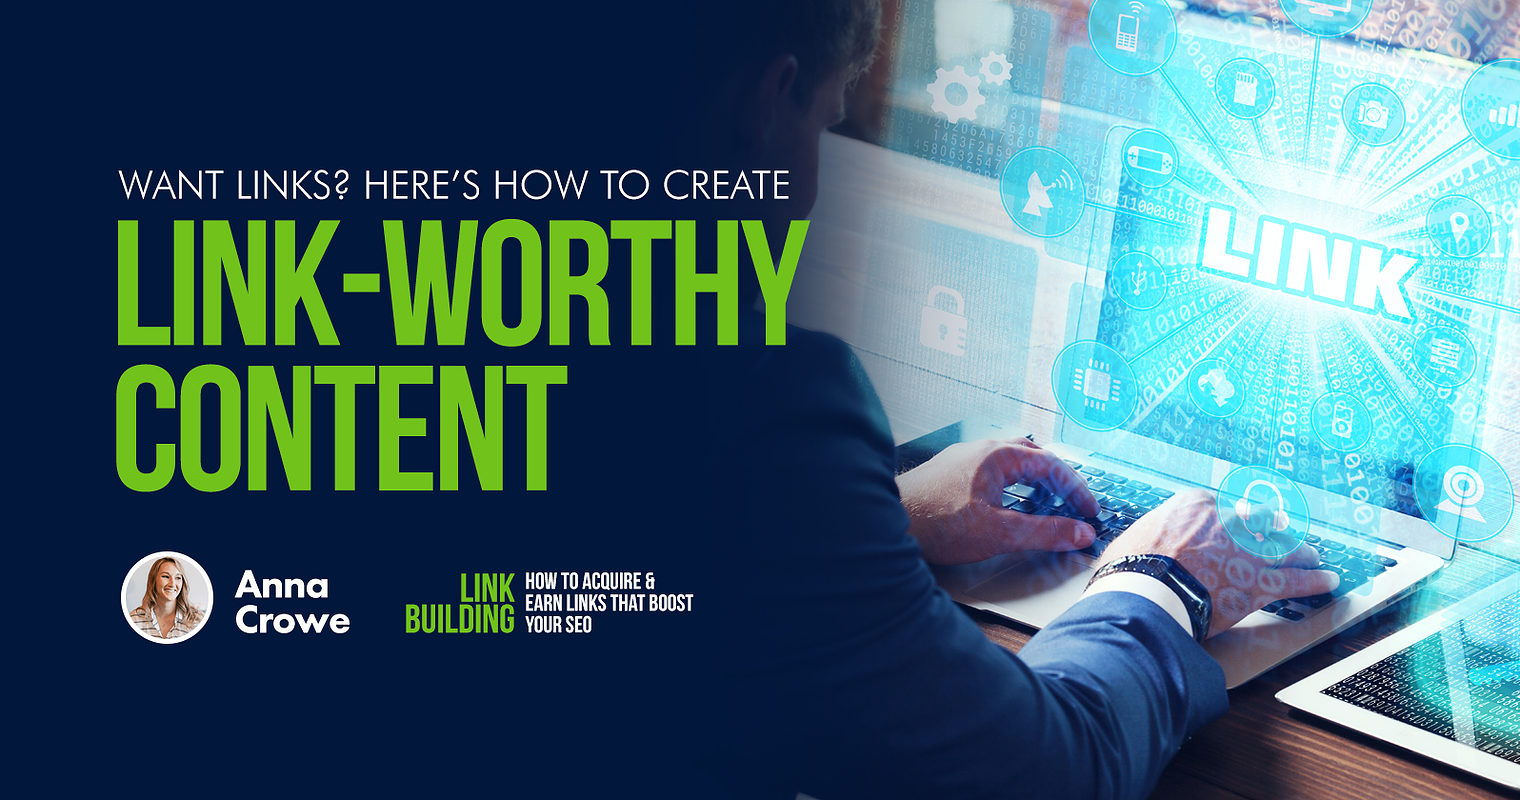 Want Links? Here’s How to Create Link-Worthy Content